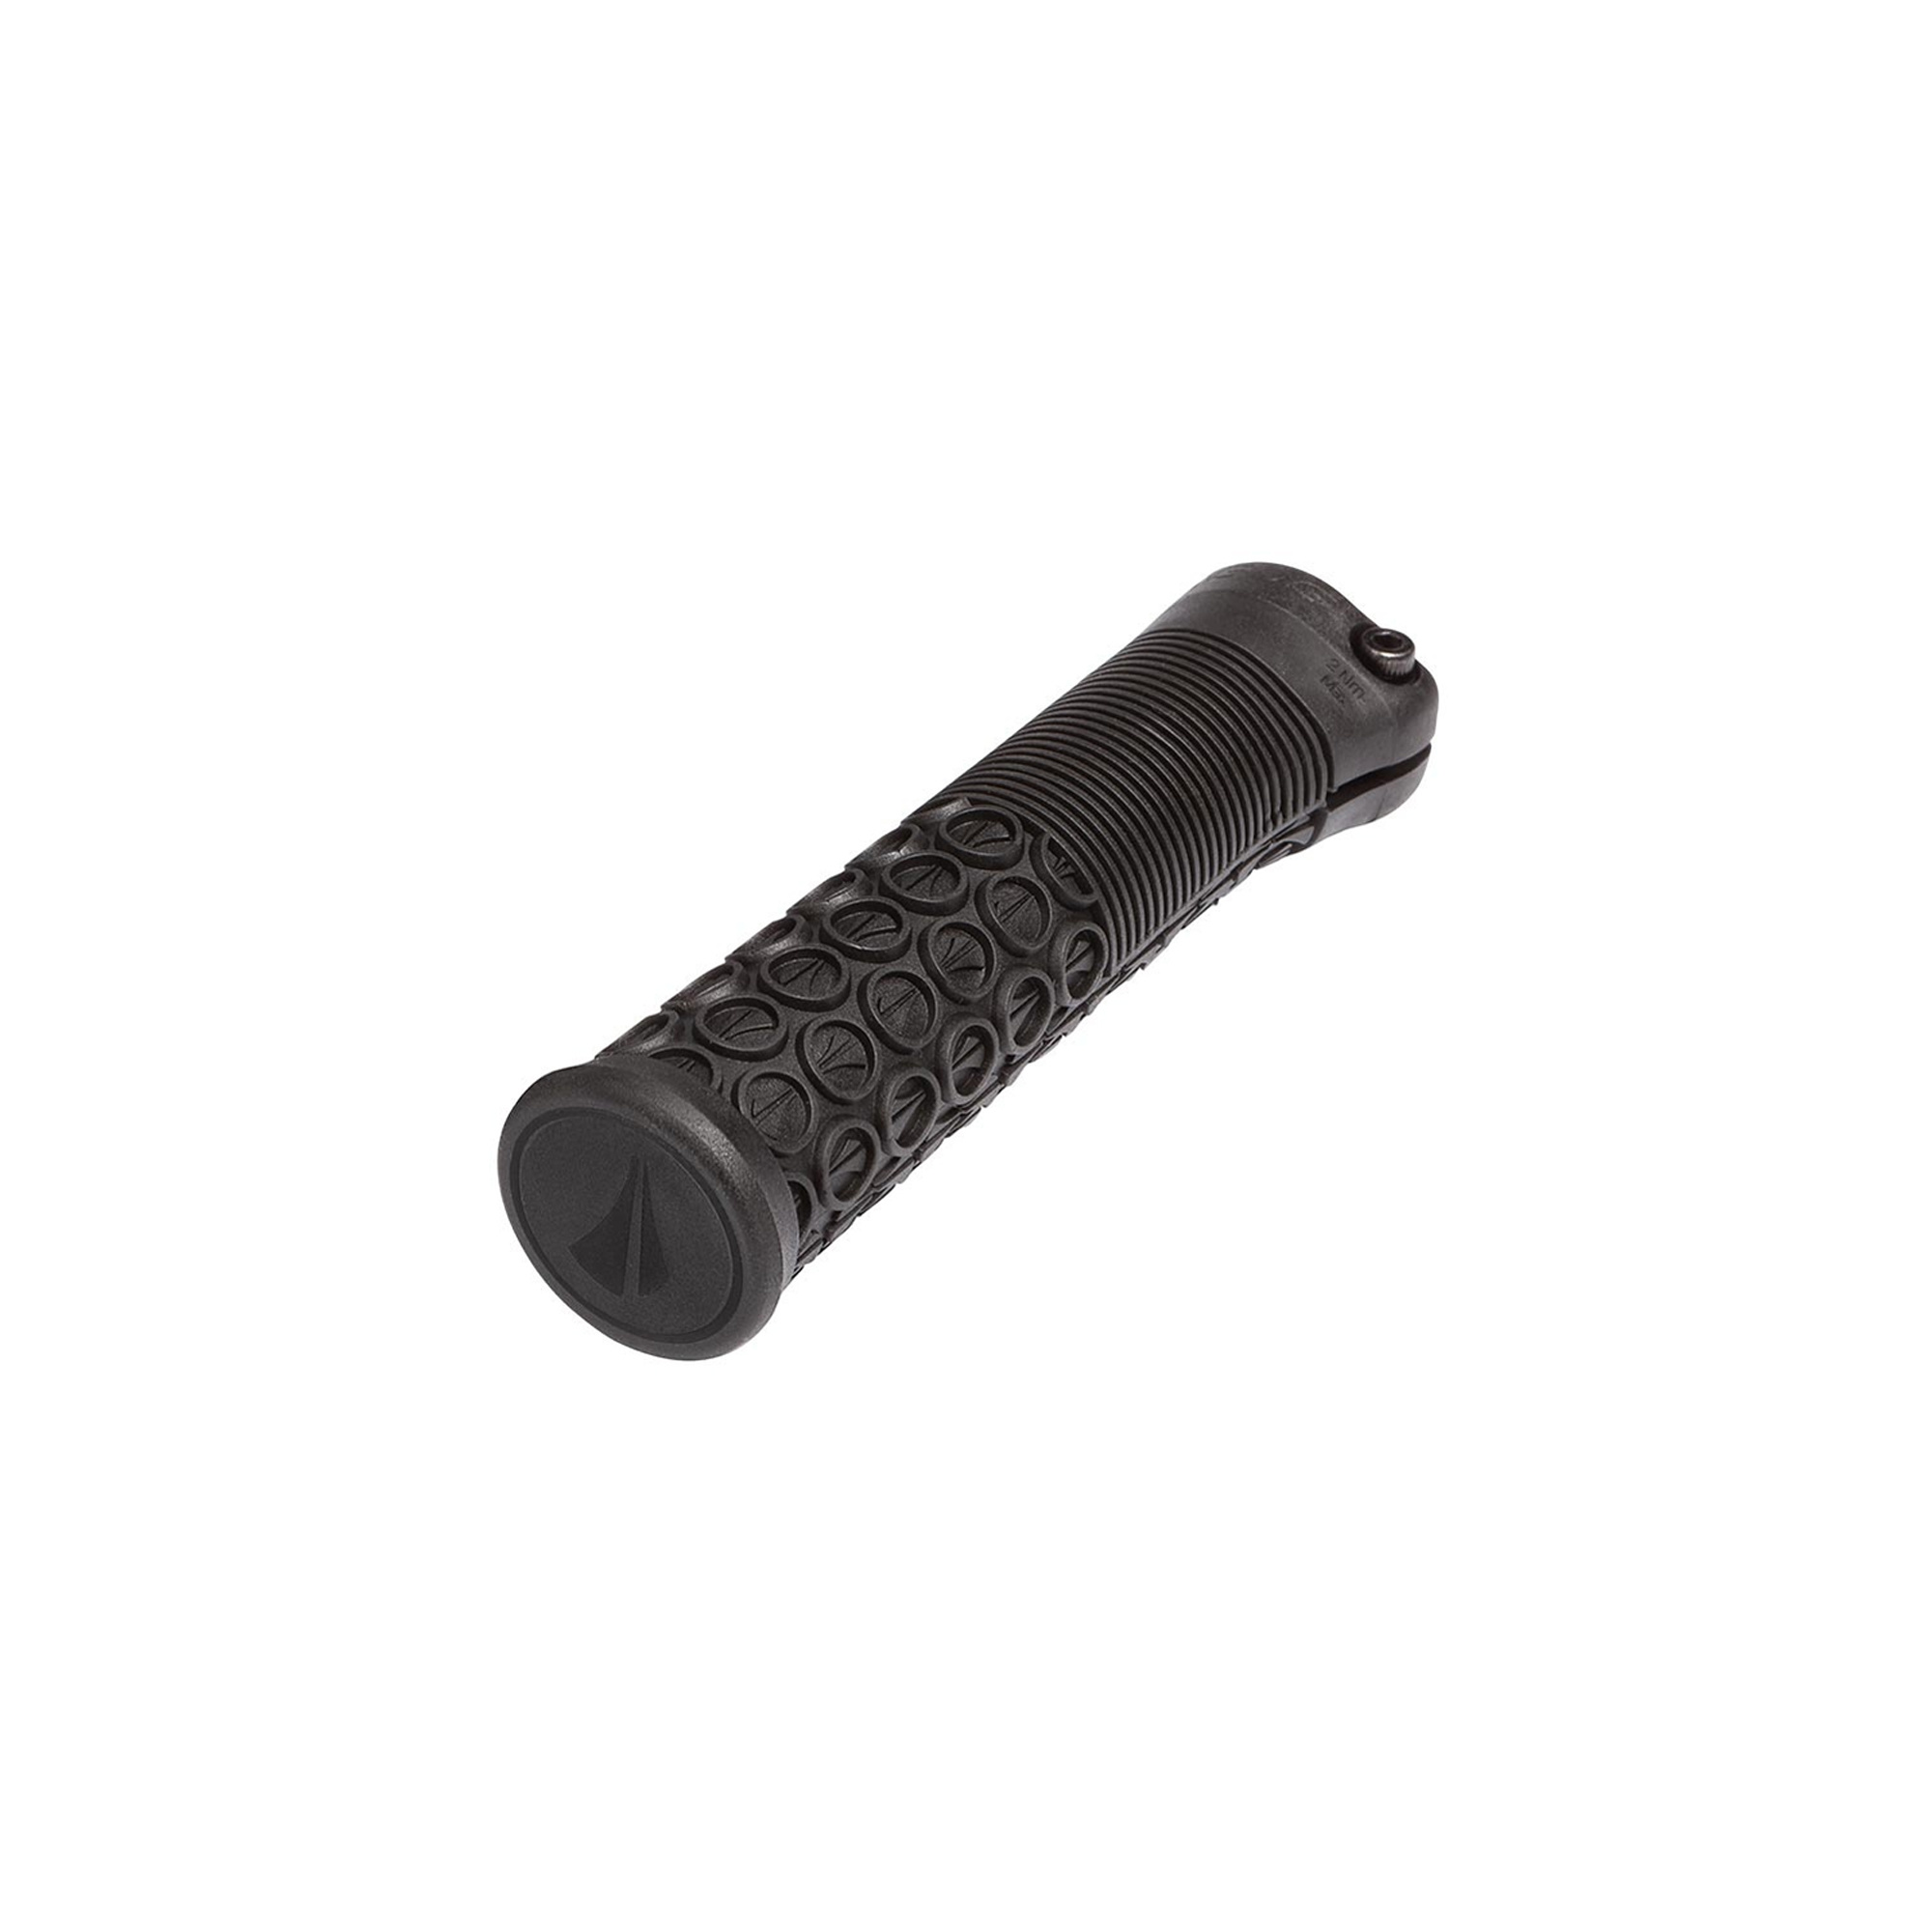 SDG Components SDG Components, Thrice 31, Grips, 136mm, Black, Pair